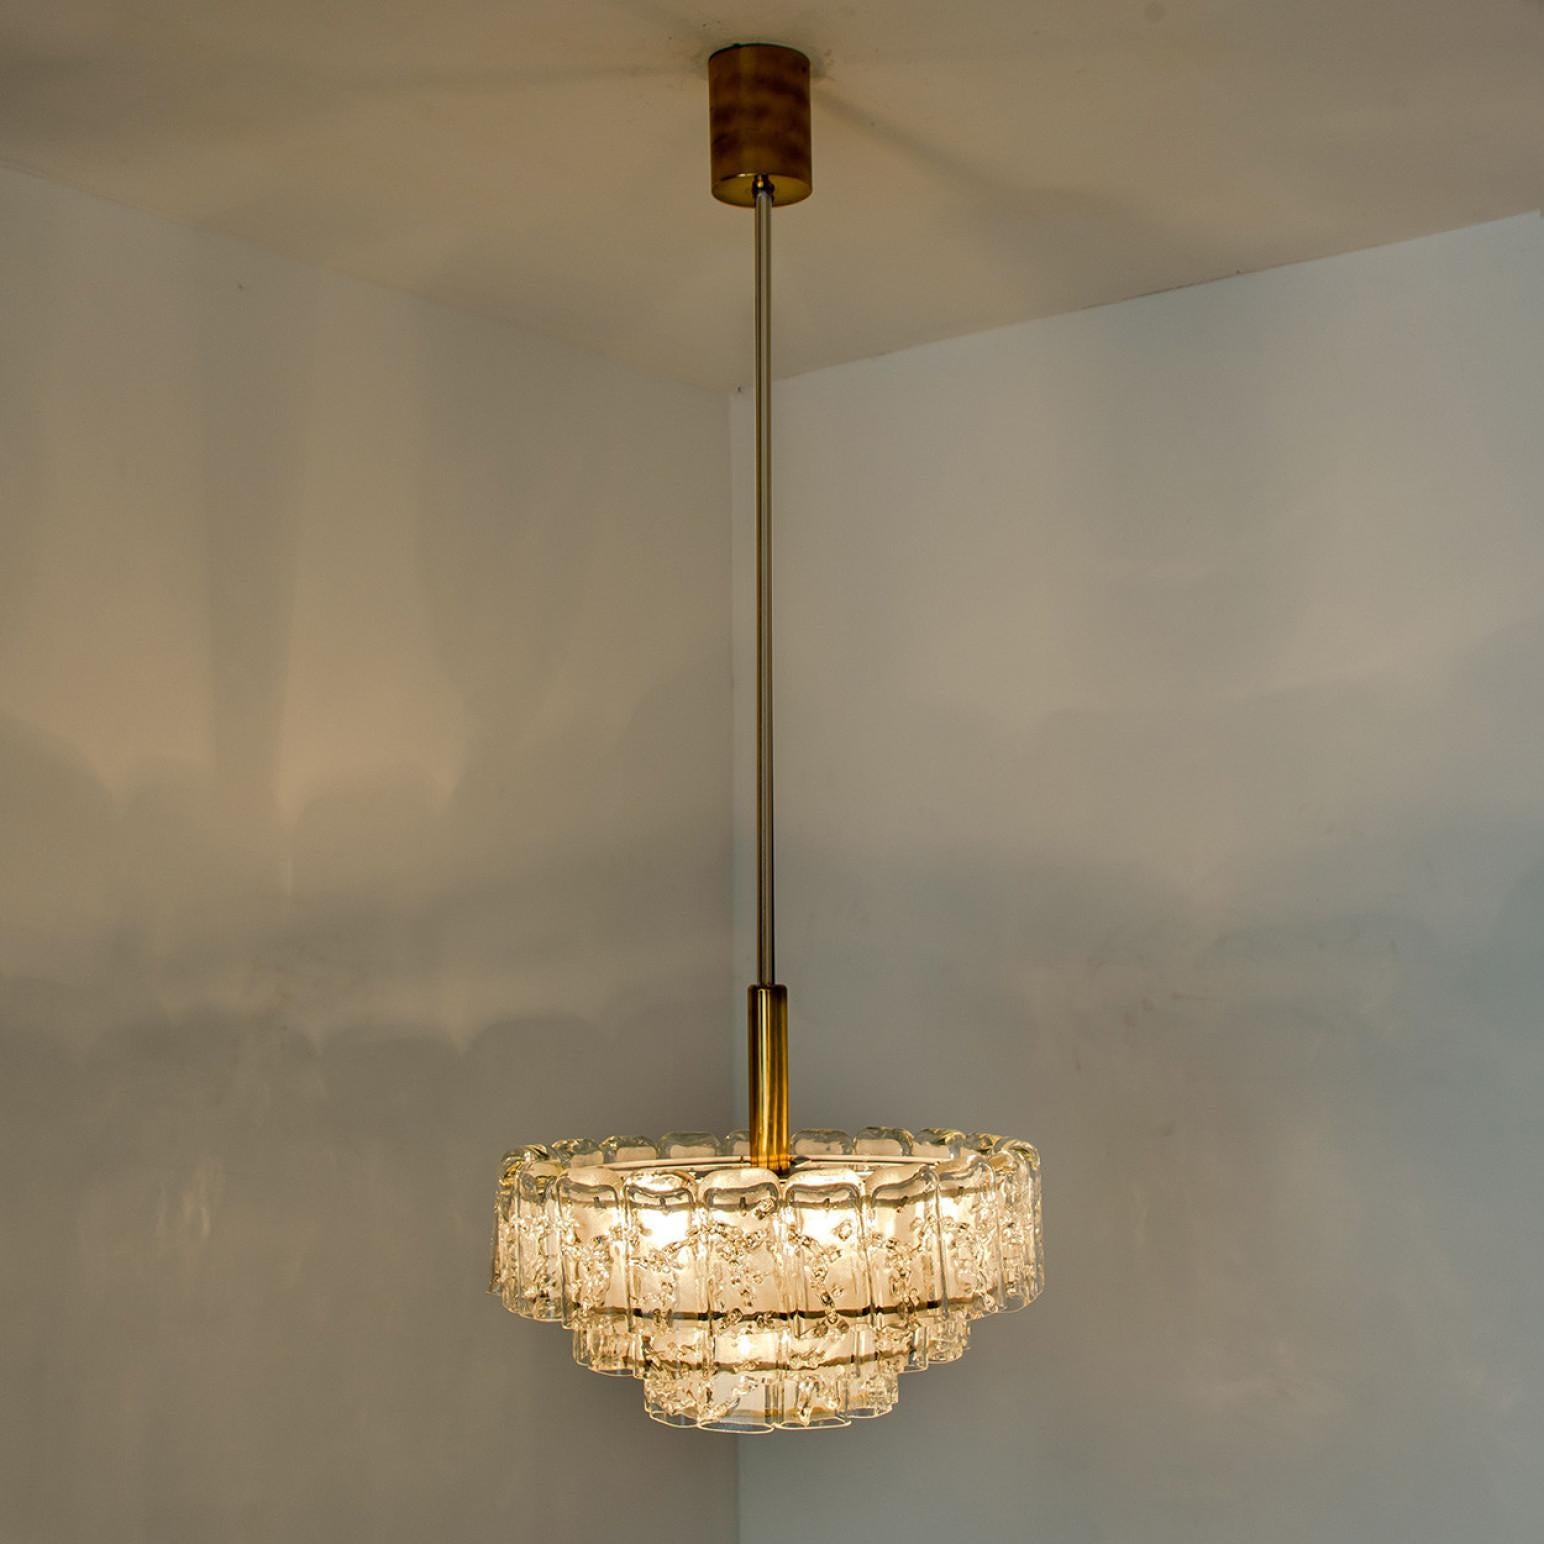 1 of the 2 Cylindrical 3 Tier Ice Glass Chandelier by Doria,  1960s For Sale 7